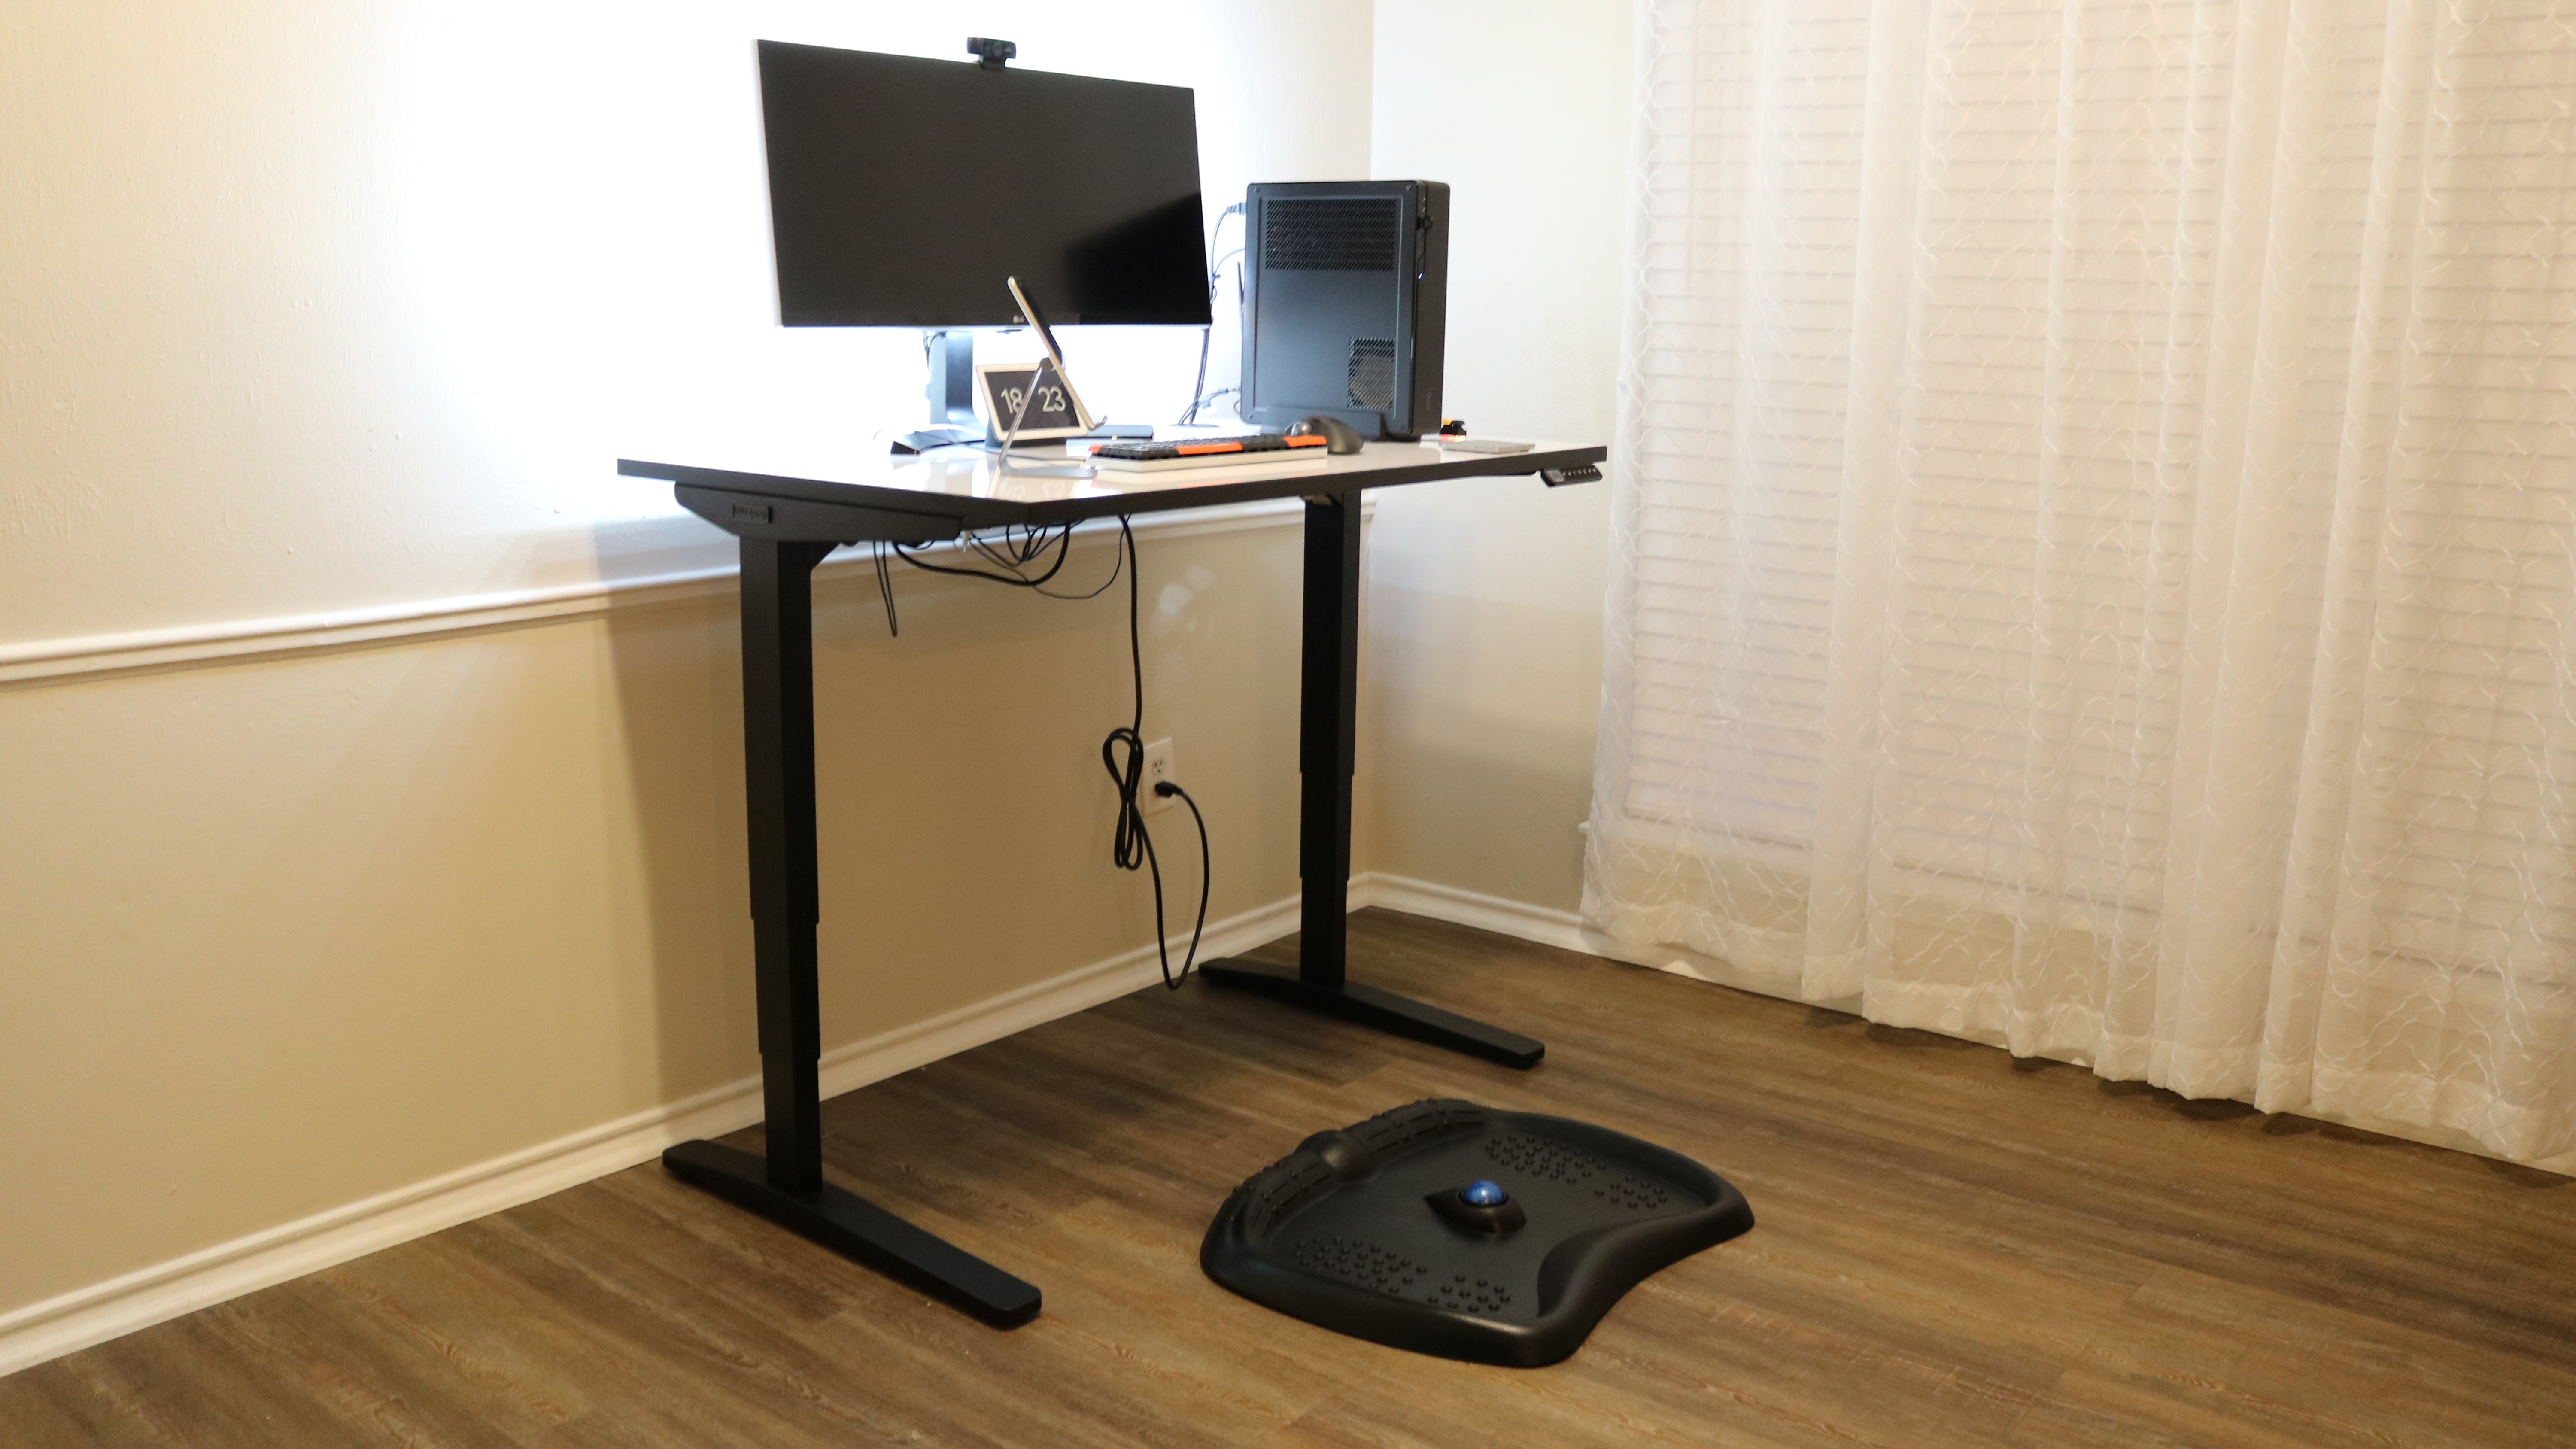 Back Patent-Pending Foot Massage Features 3D Ergonomic Support Mats for Feet for Office & Home Black Best Standing Desk Mat with Anti Fatigue Foot Design Deluxe Comfort While You Stand Legs 